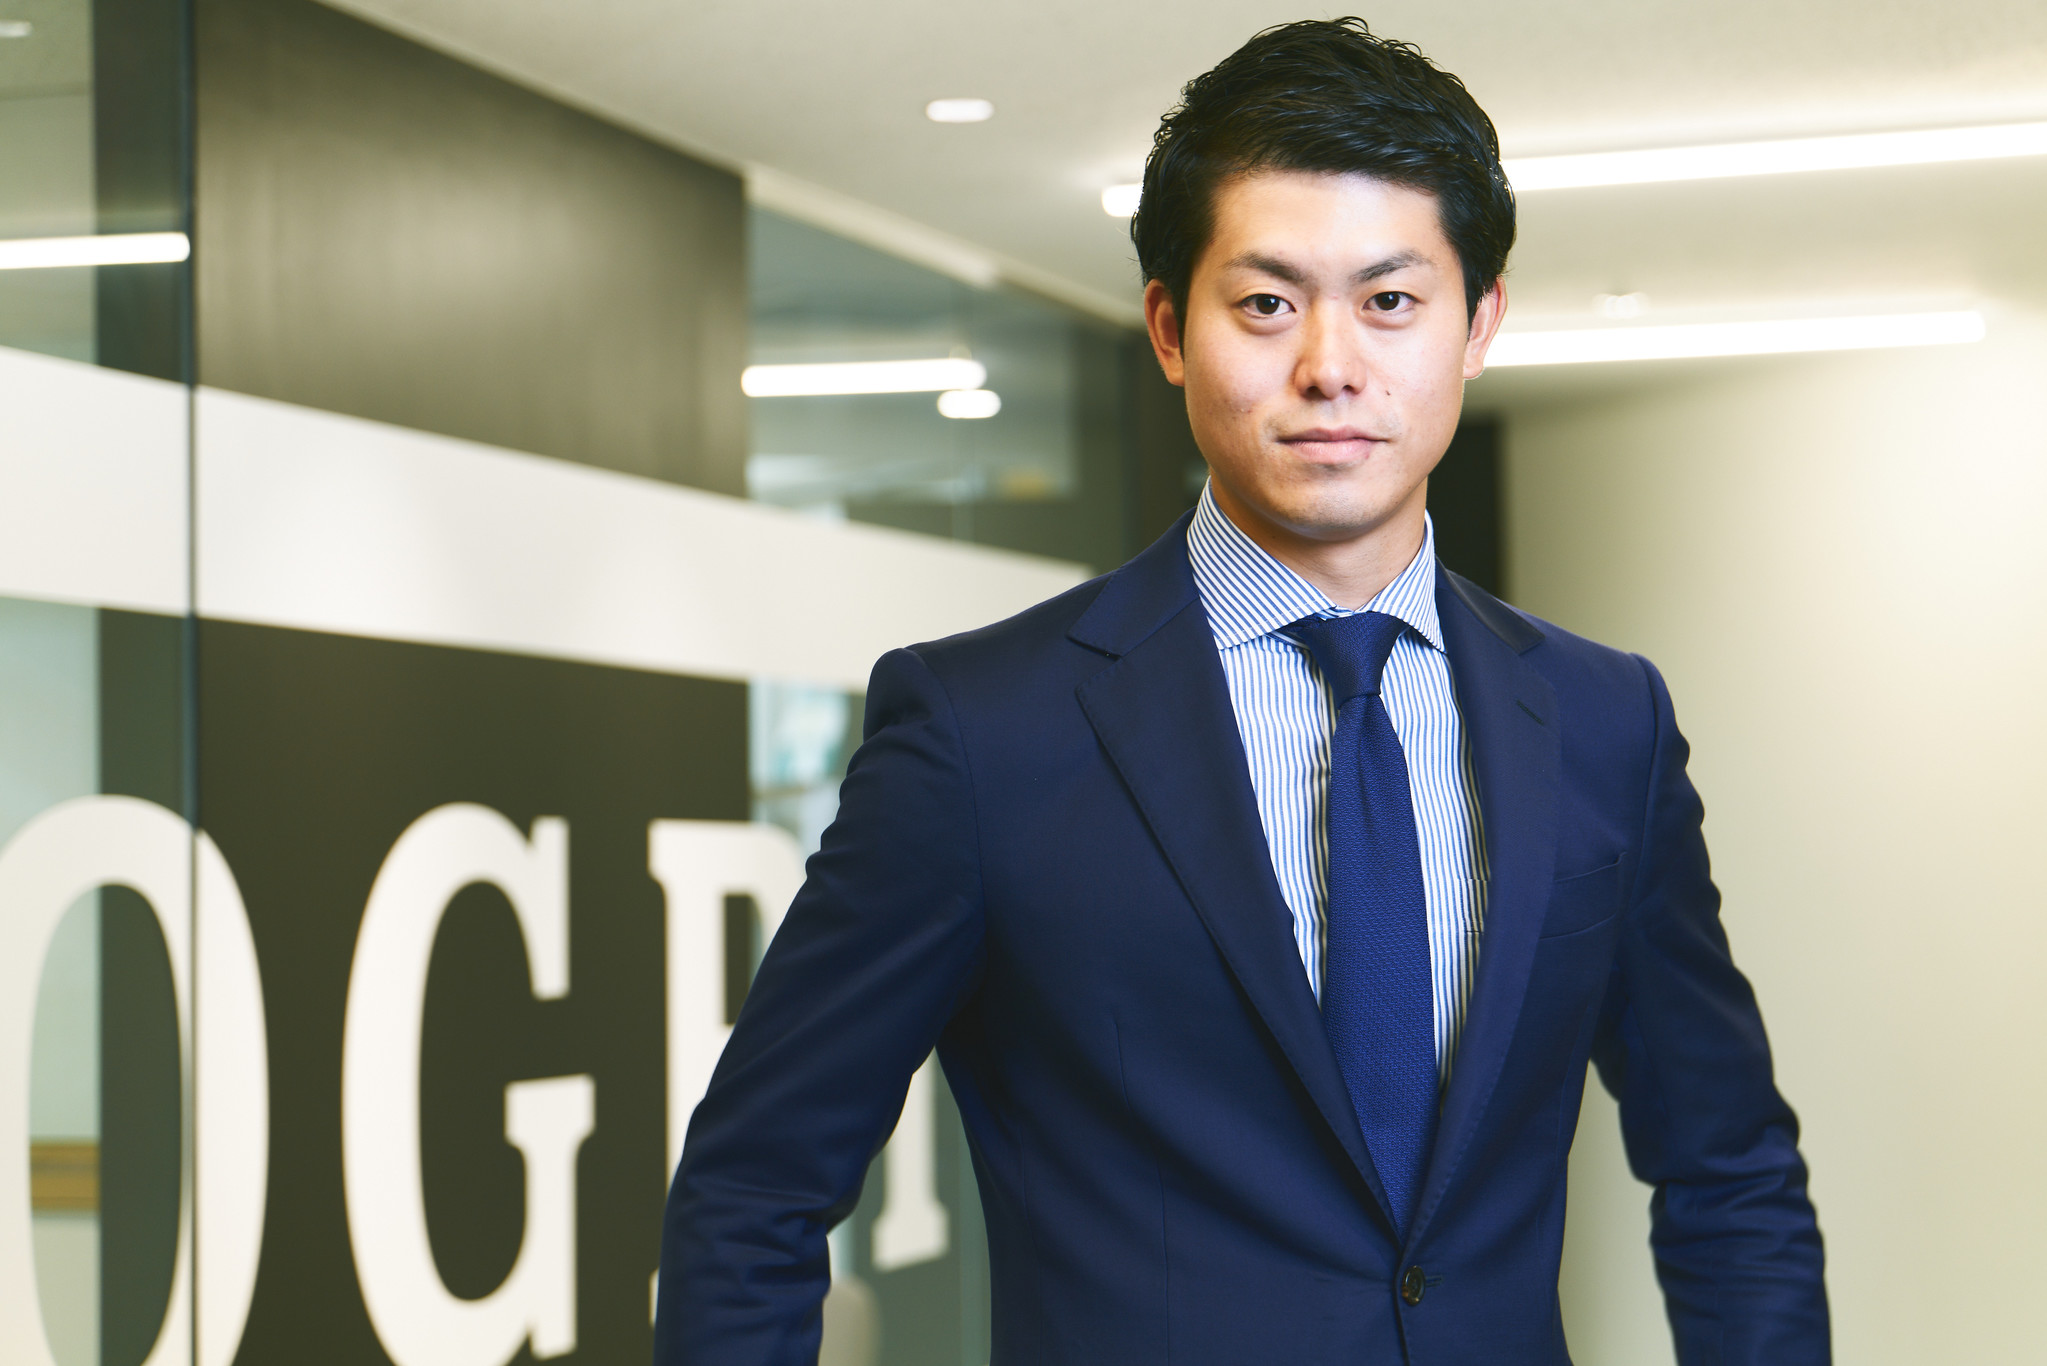 「Forbes JAPAN 30 UNDER 30 JAPAN 2020」に株式会社プログリット 代表取締役社長 岡田祥吾が選出